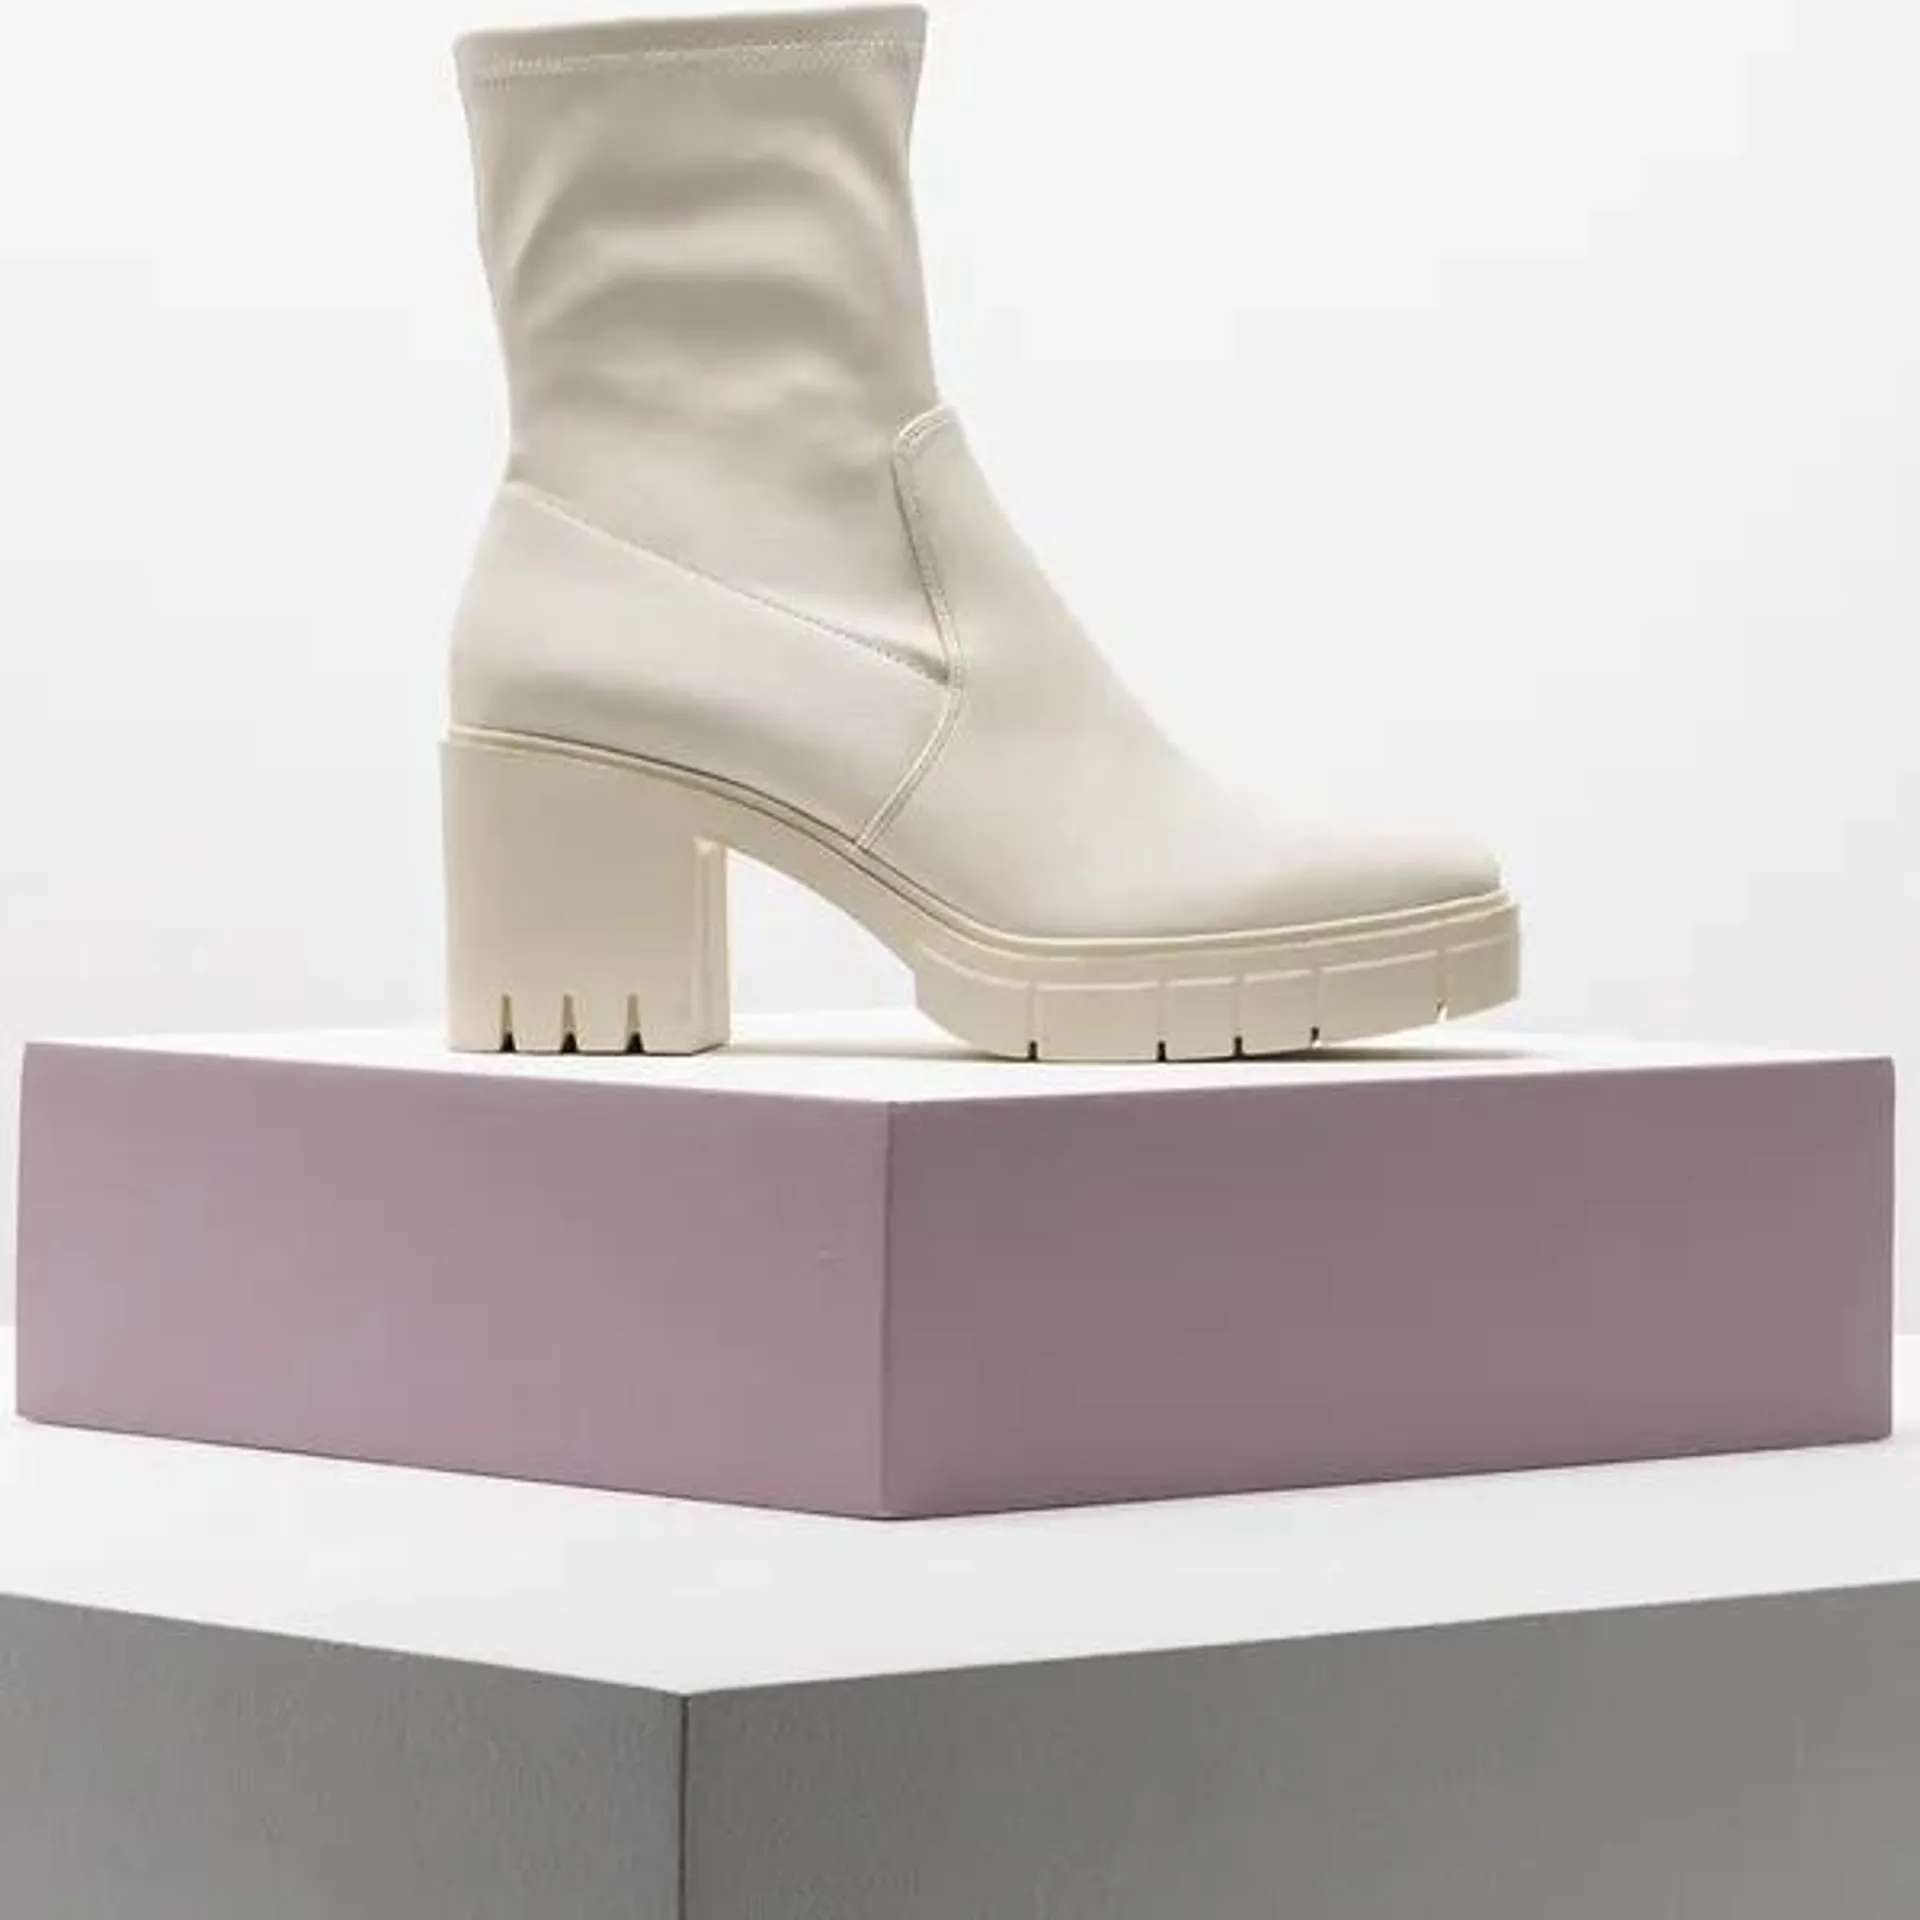 Cleated platform boot white